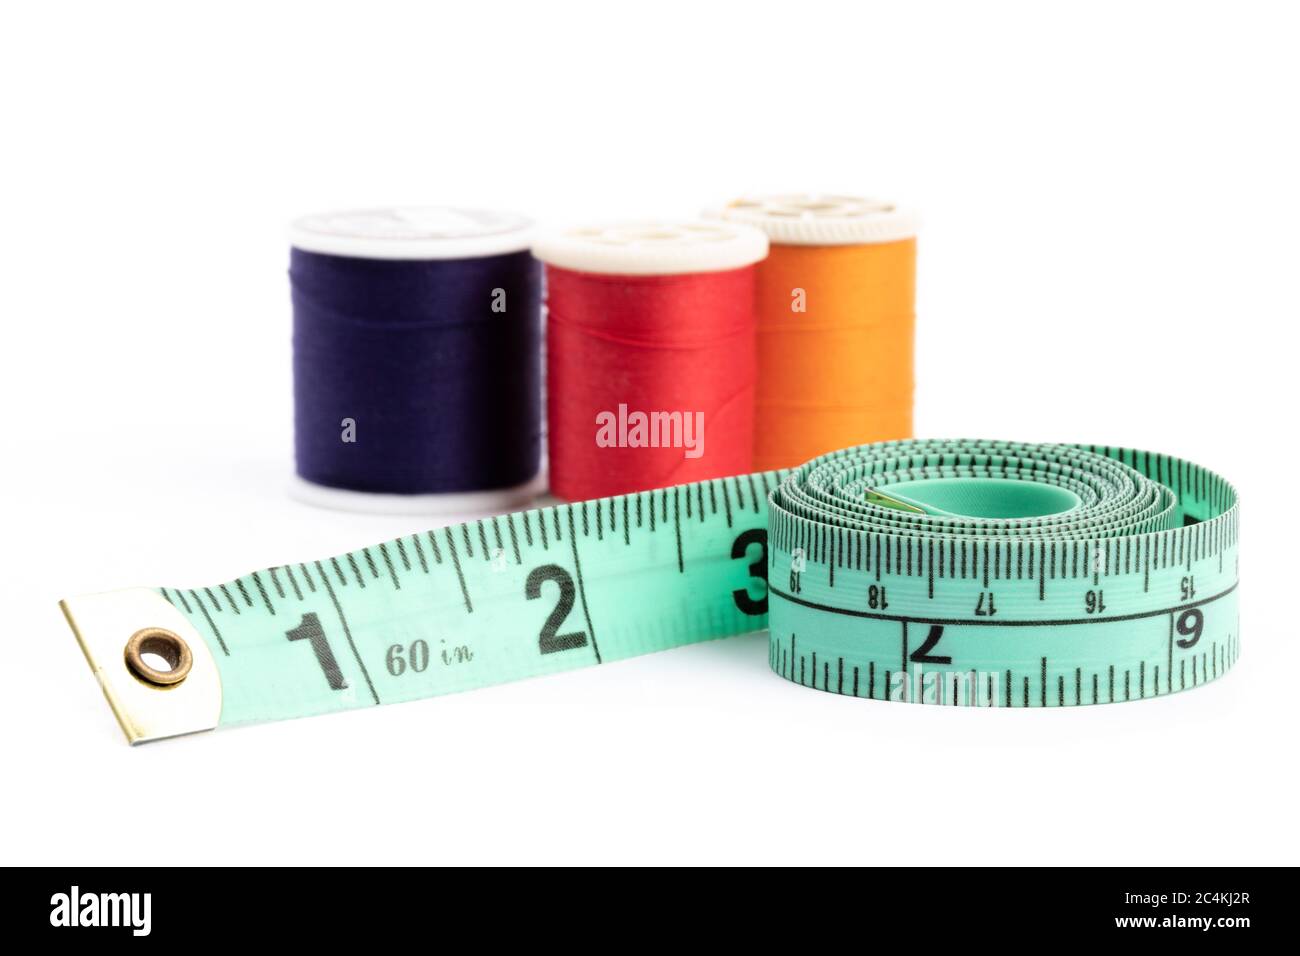 https://c8.alamy.com/comp/2C4KJ2R/a-green-tailors-cloth-tape-measure-with-spools-of-sewing-thread-in-the-background-isolated-on-white-2C4KJ2R.jpg